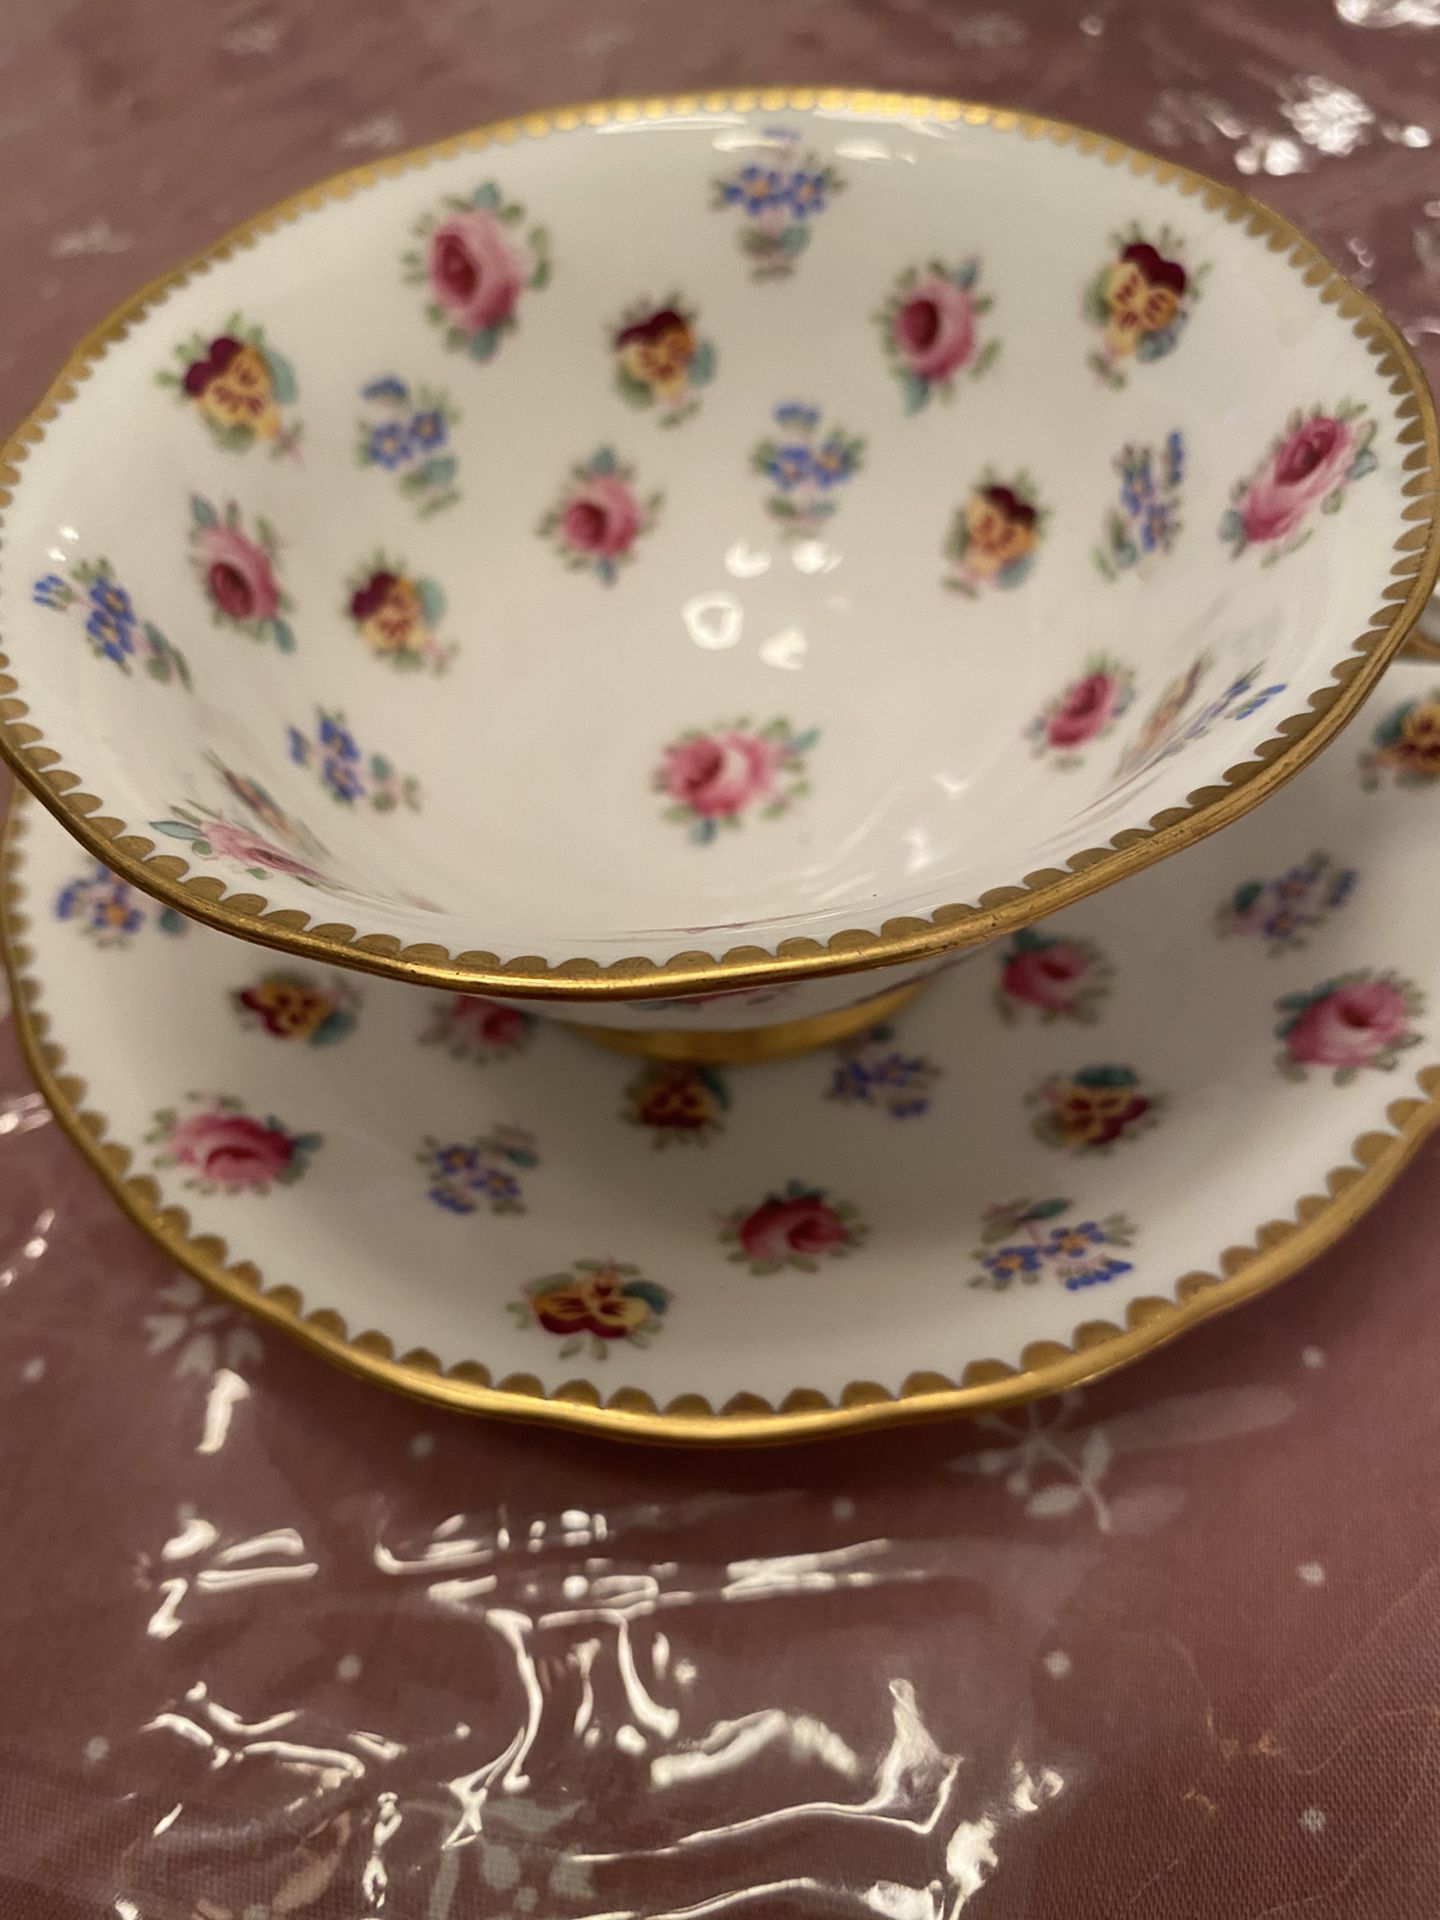 Antique, Royal Chelsea cup and Saucer #382A. Made in England.